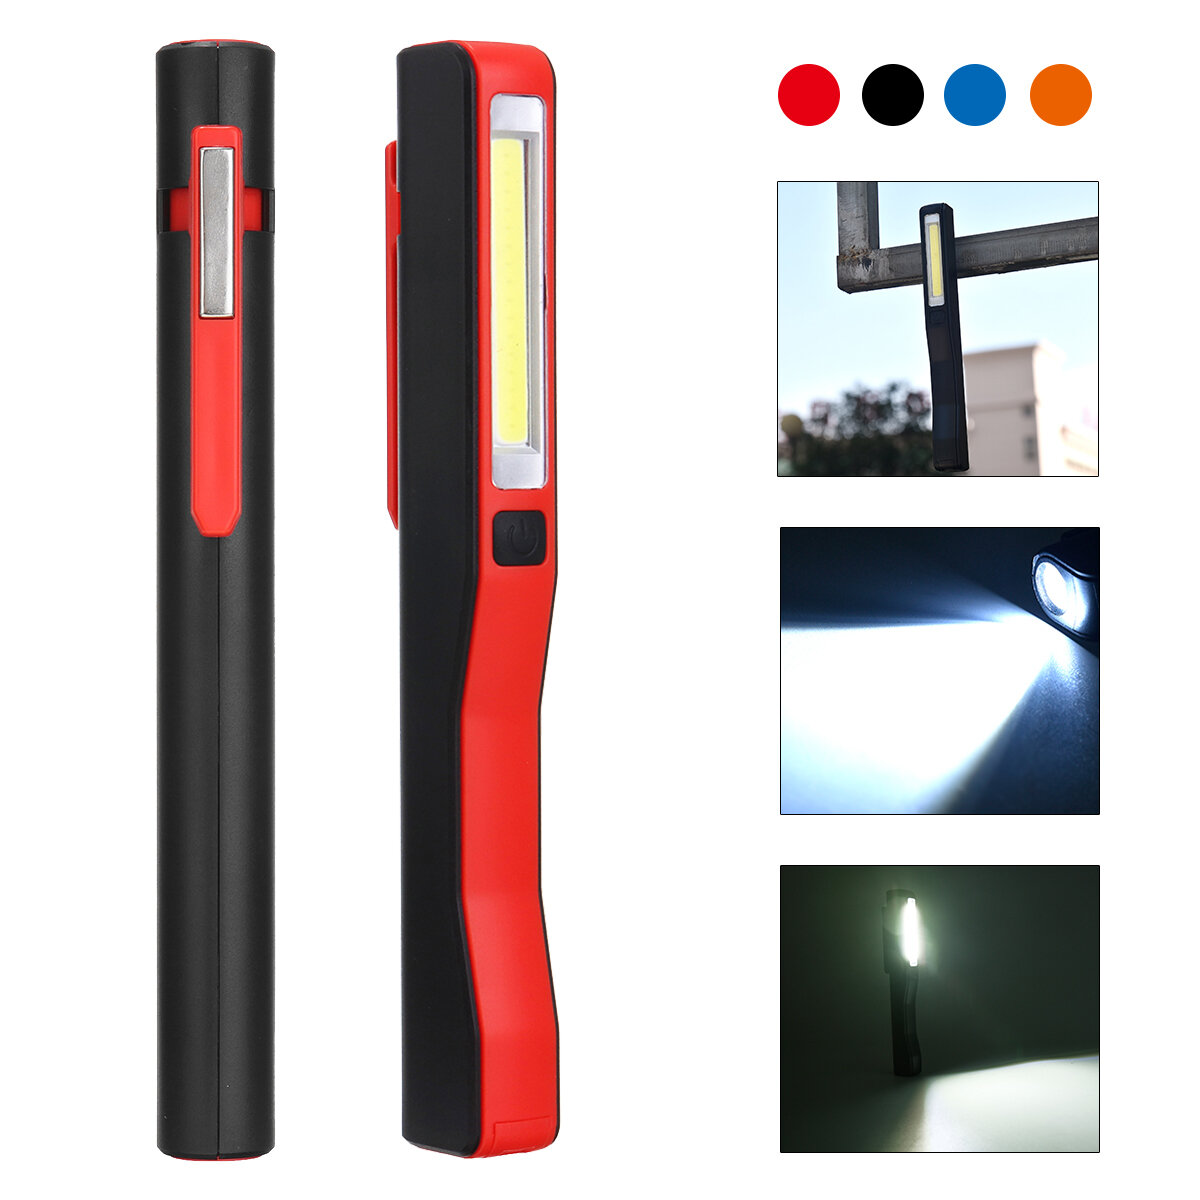 

3W COB +1W LED USB Magnetic Work Light Outdoor Camping Emergency Flashlight Night Inspection Lamp